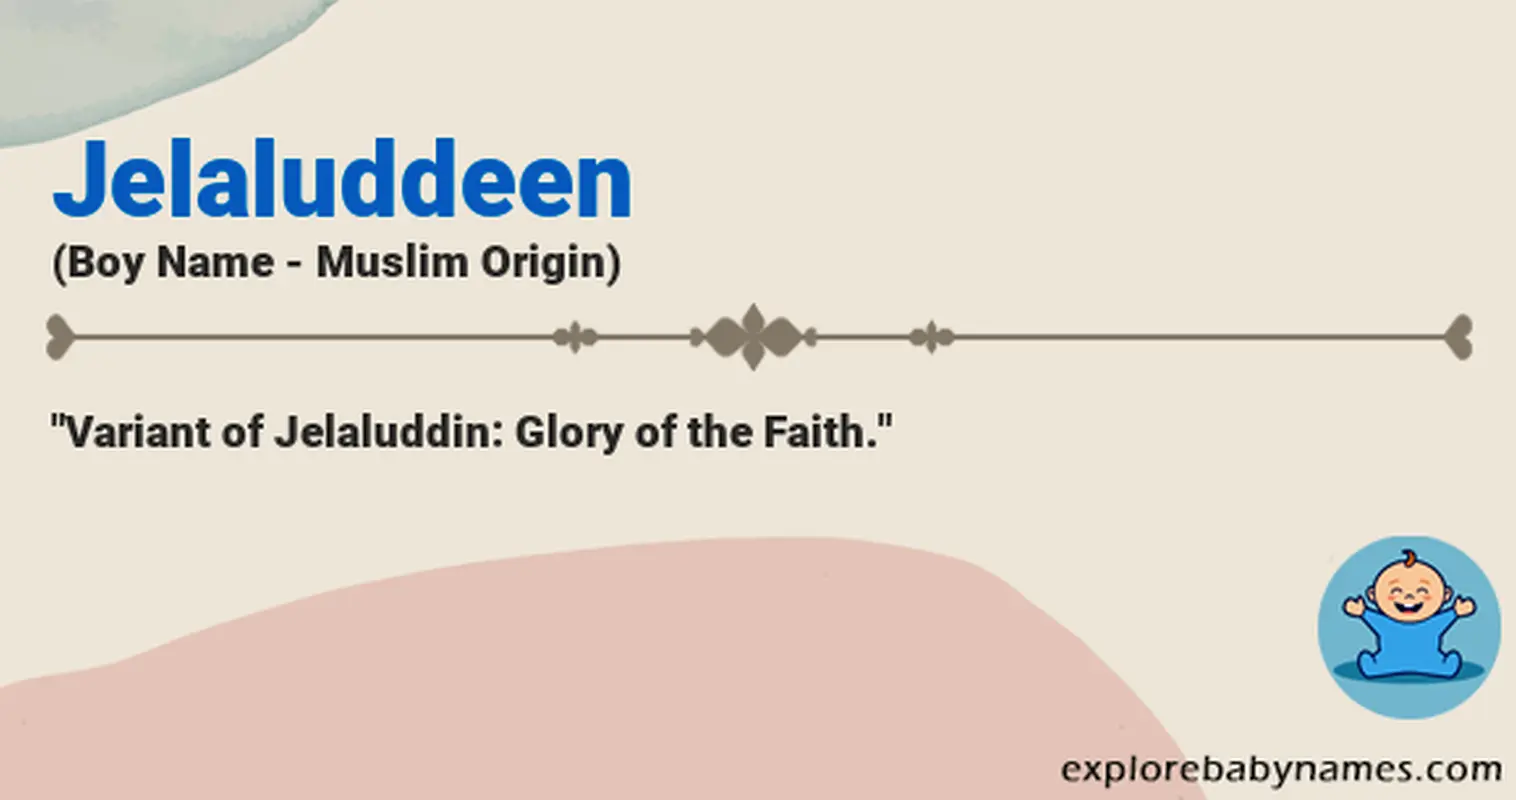 Meaning of Jelaluddeen